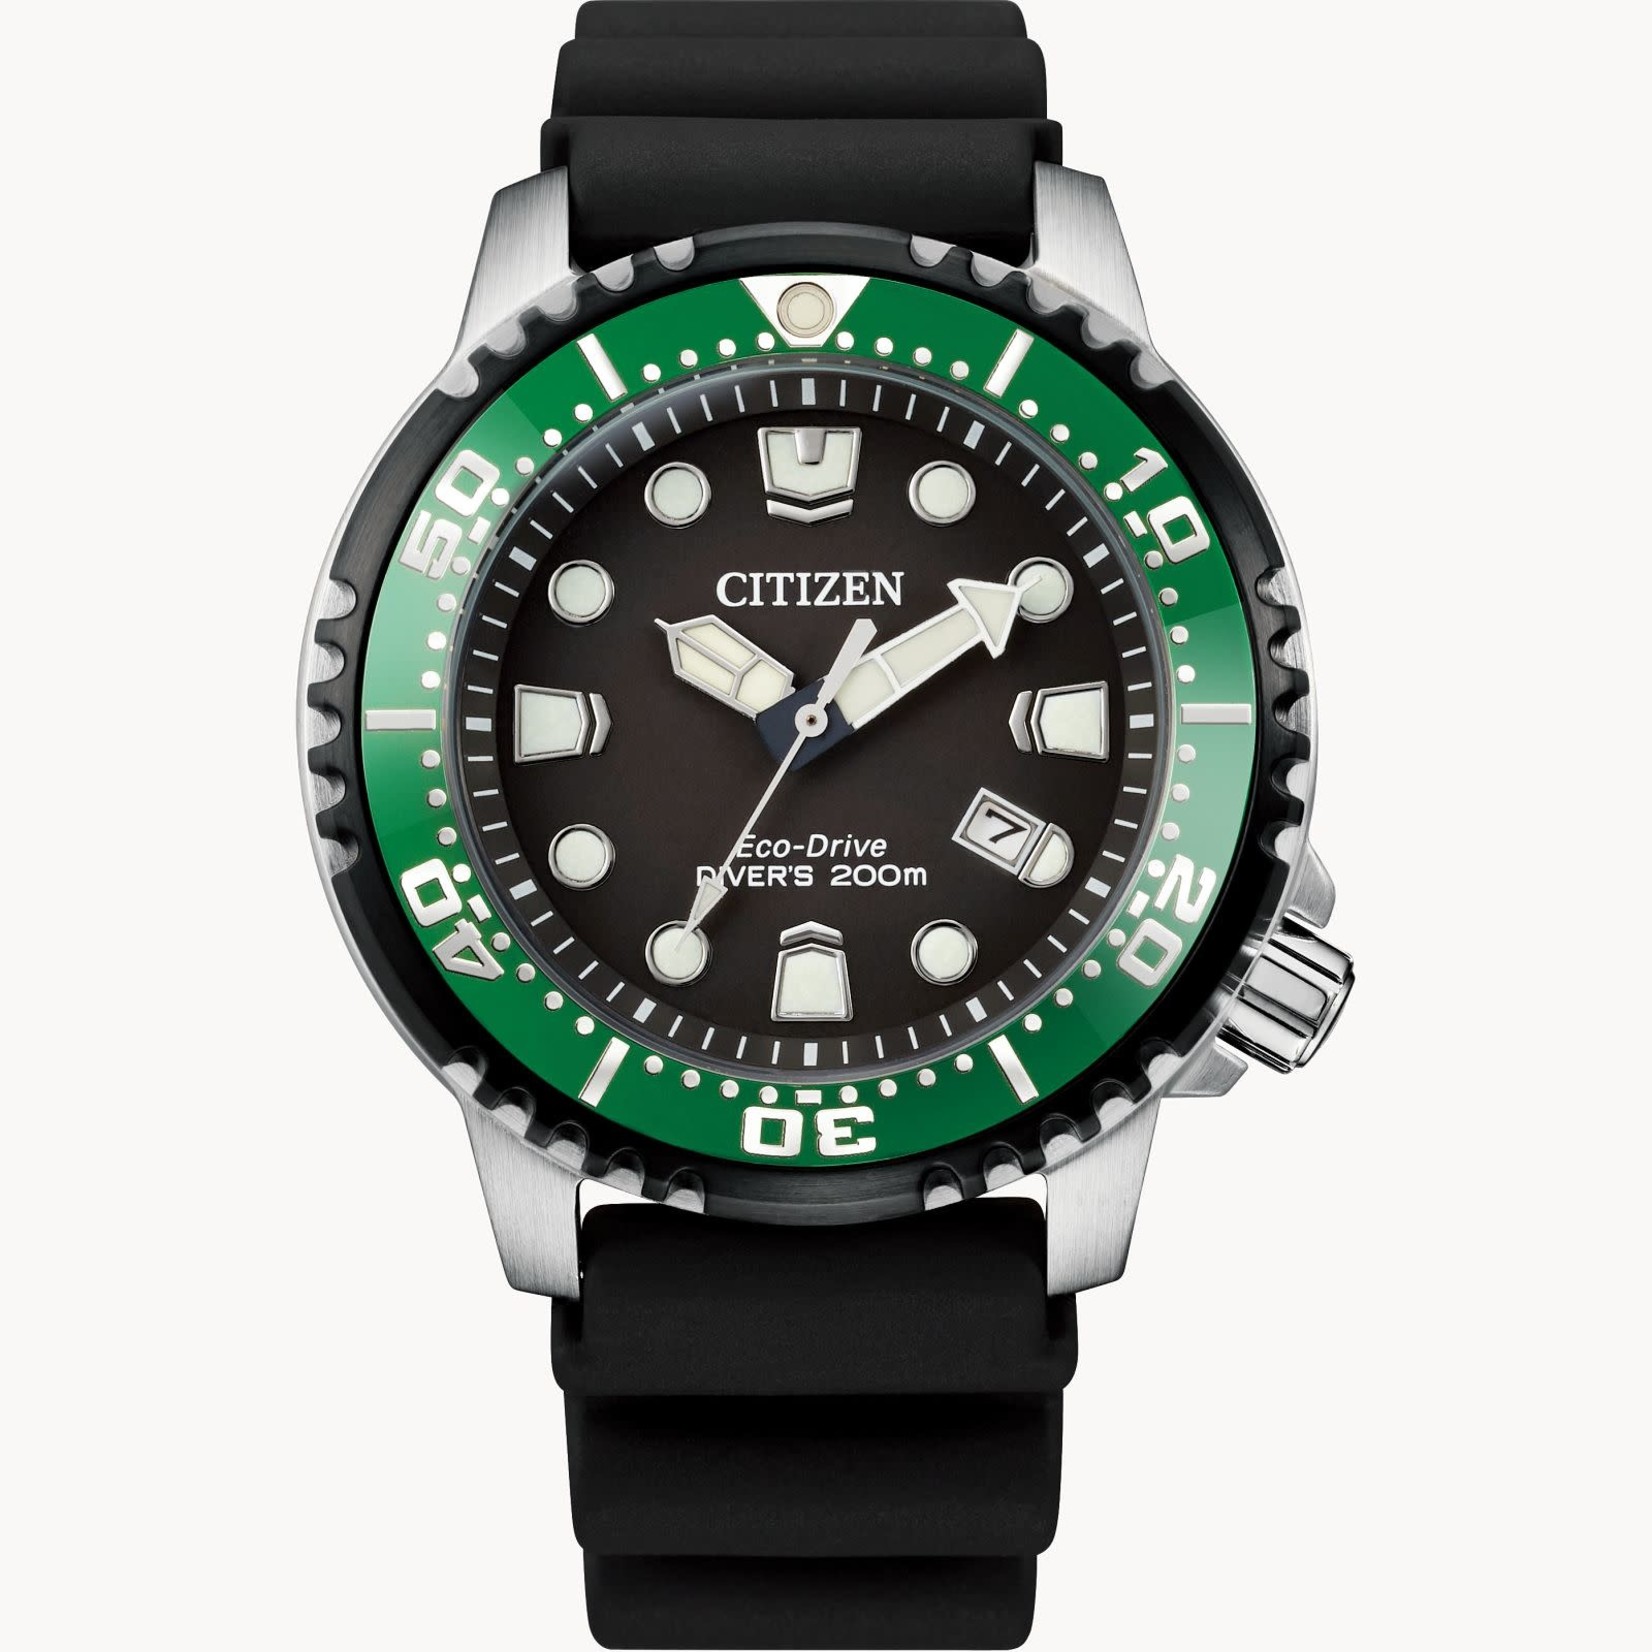 Promaster Eco-Drive Citizen WR 200M Green bezel Watch - Robinette Jewelers